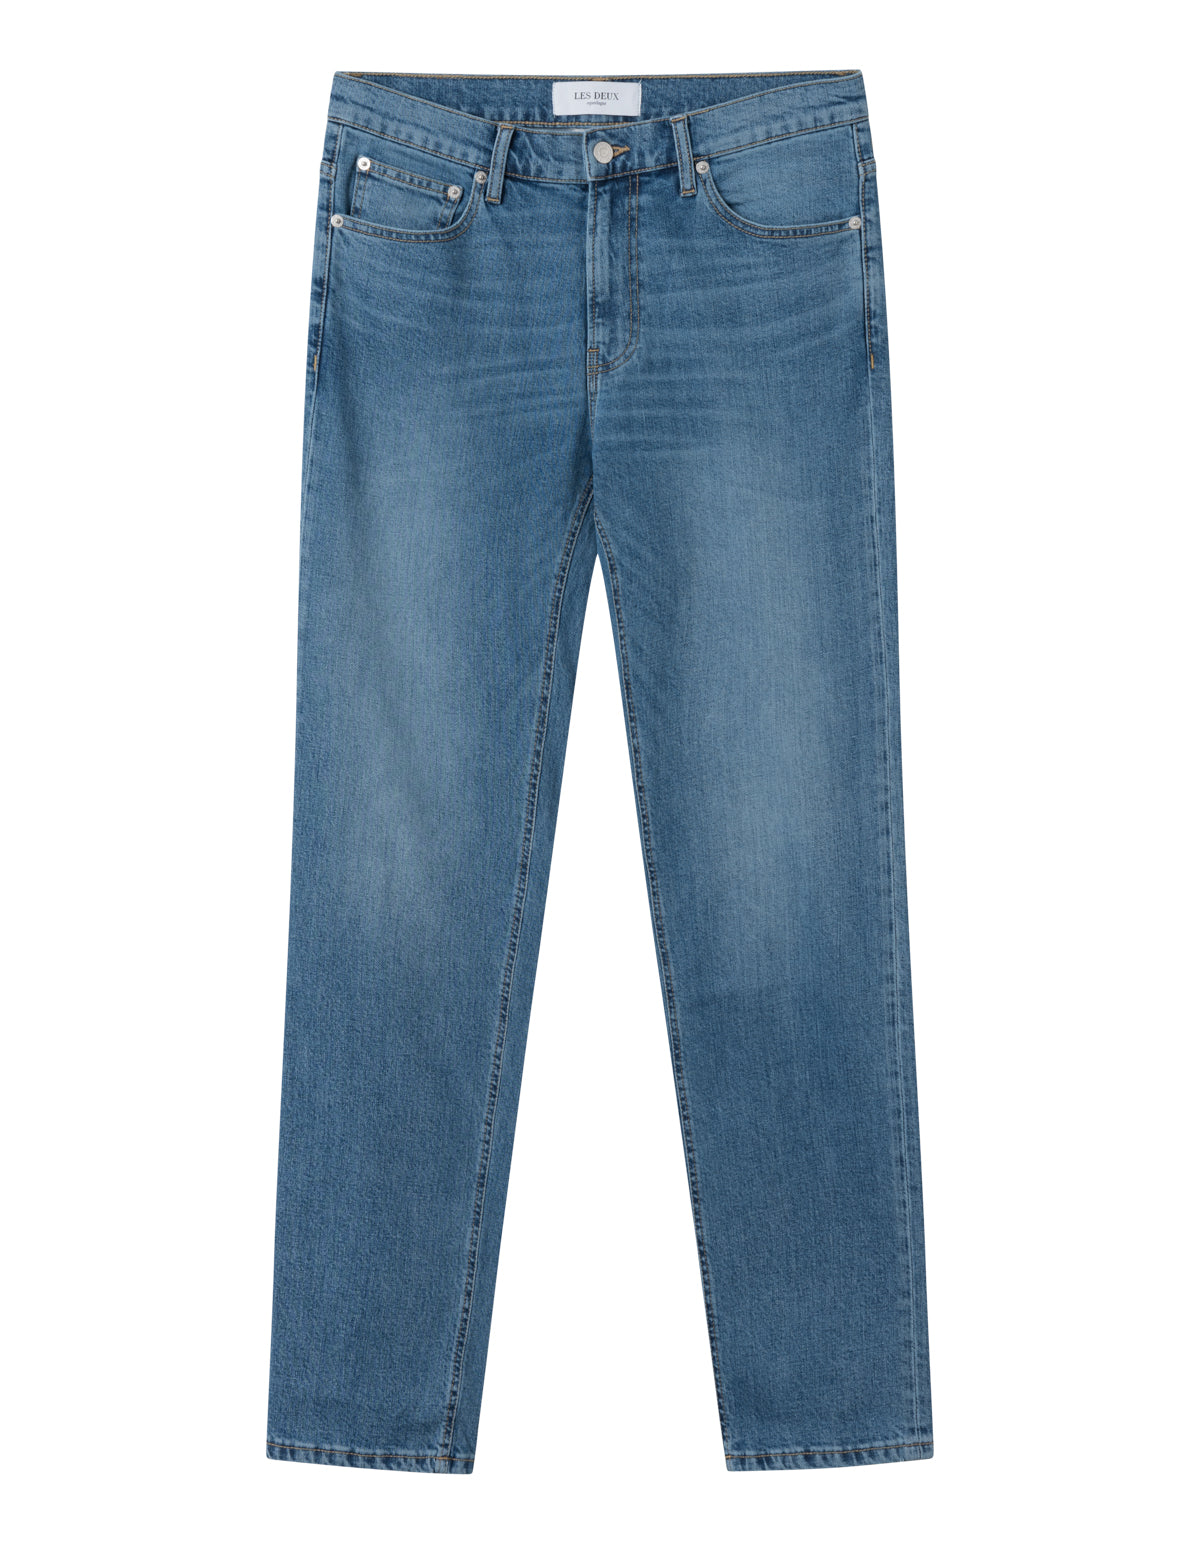 RUSSELL REGULAR FIT JEANS